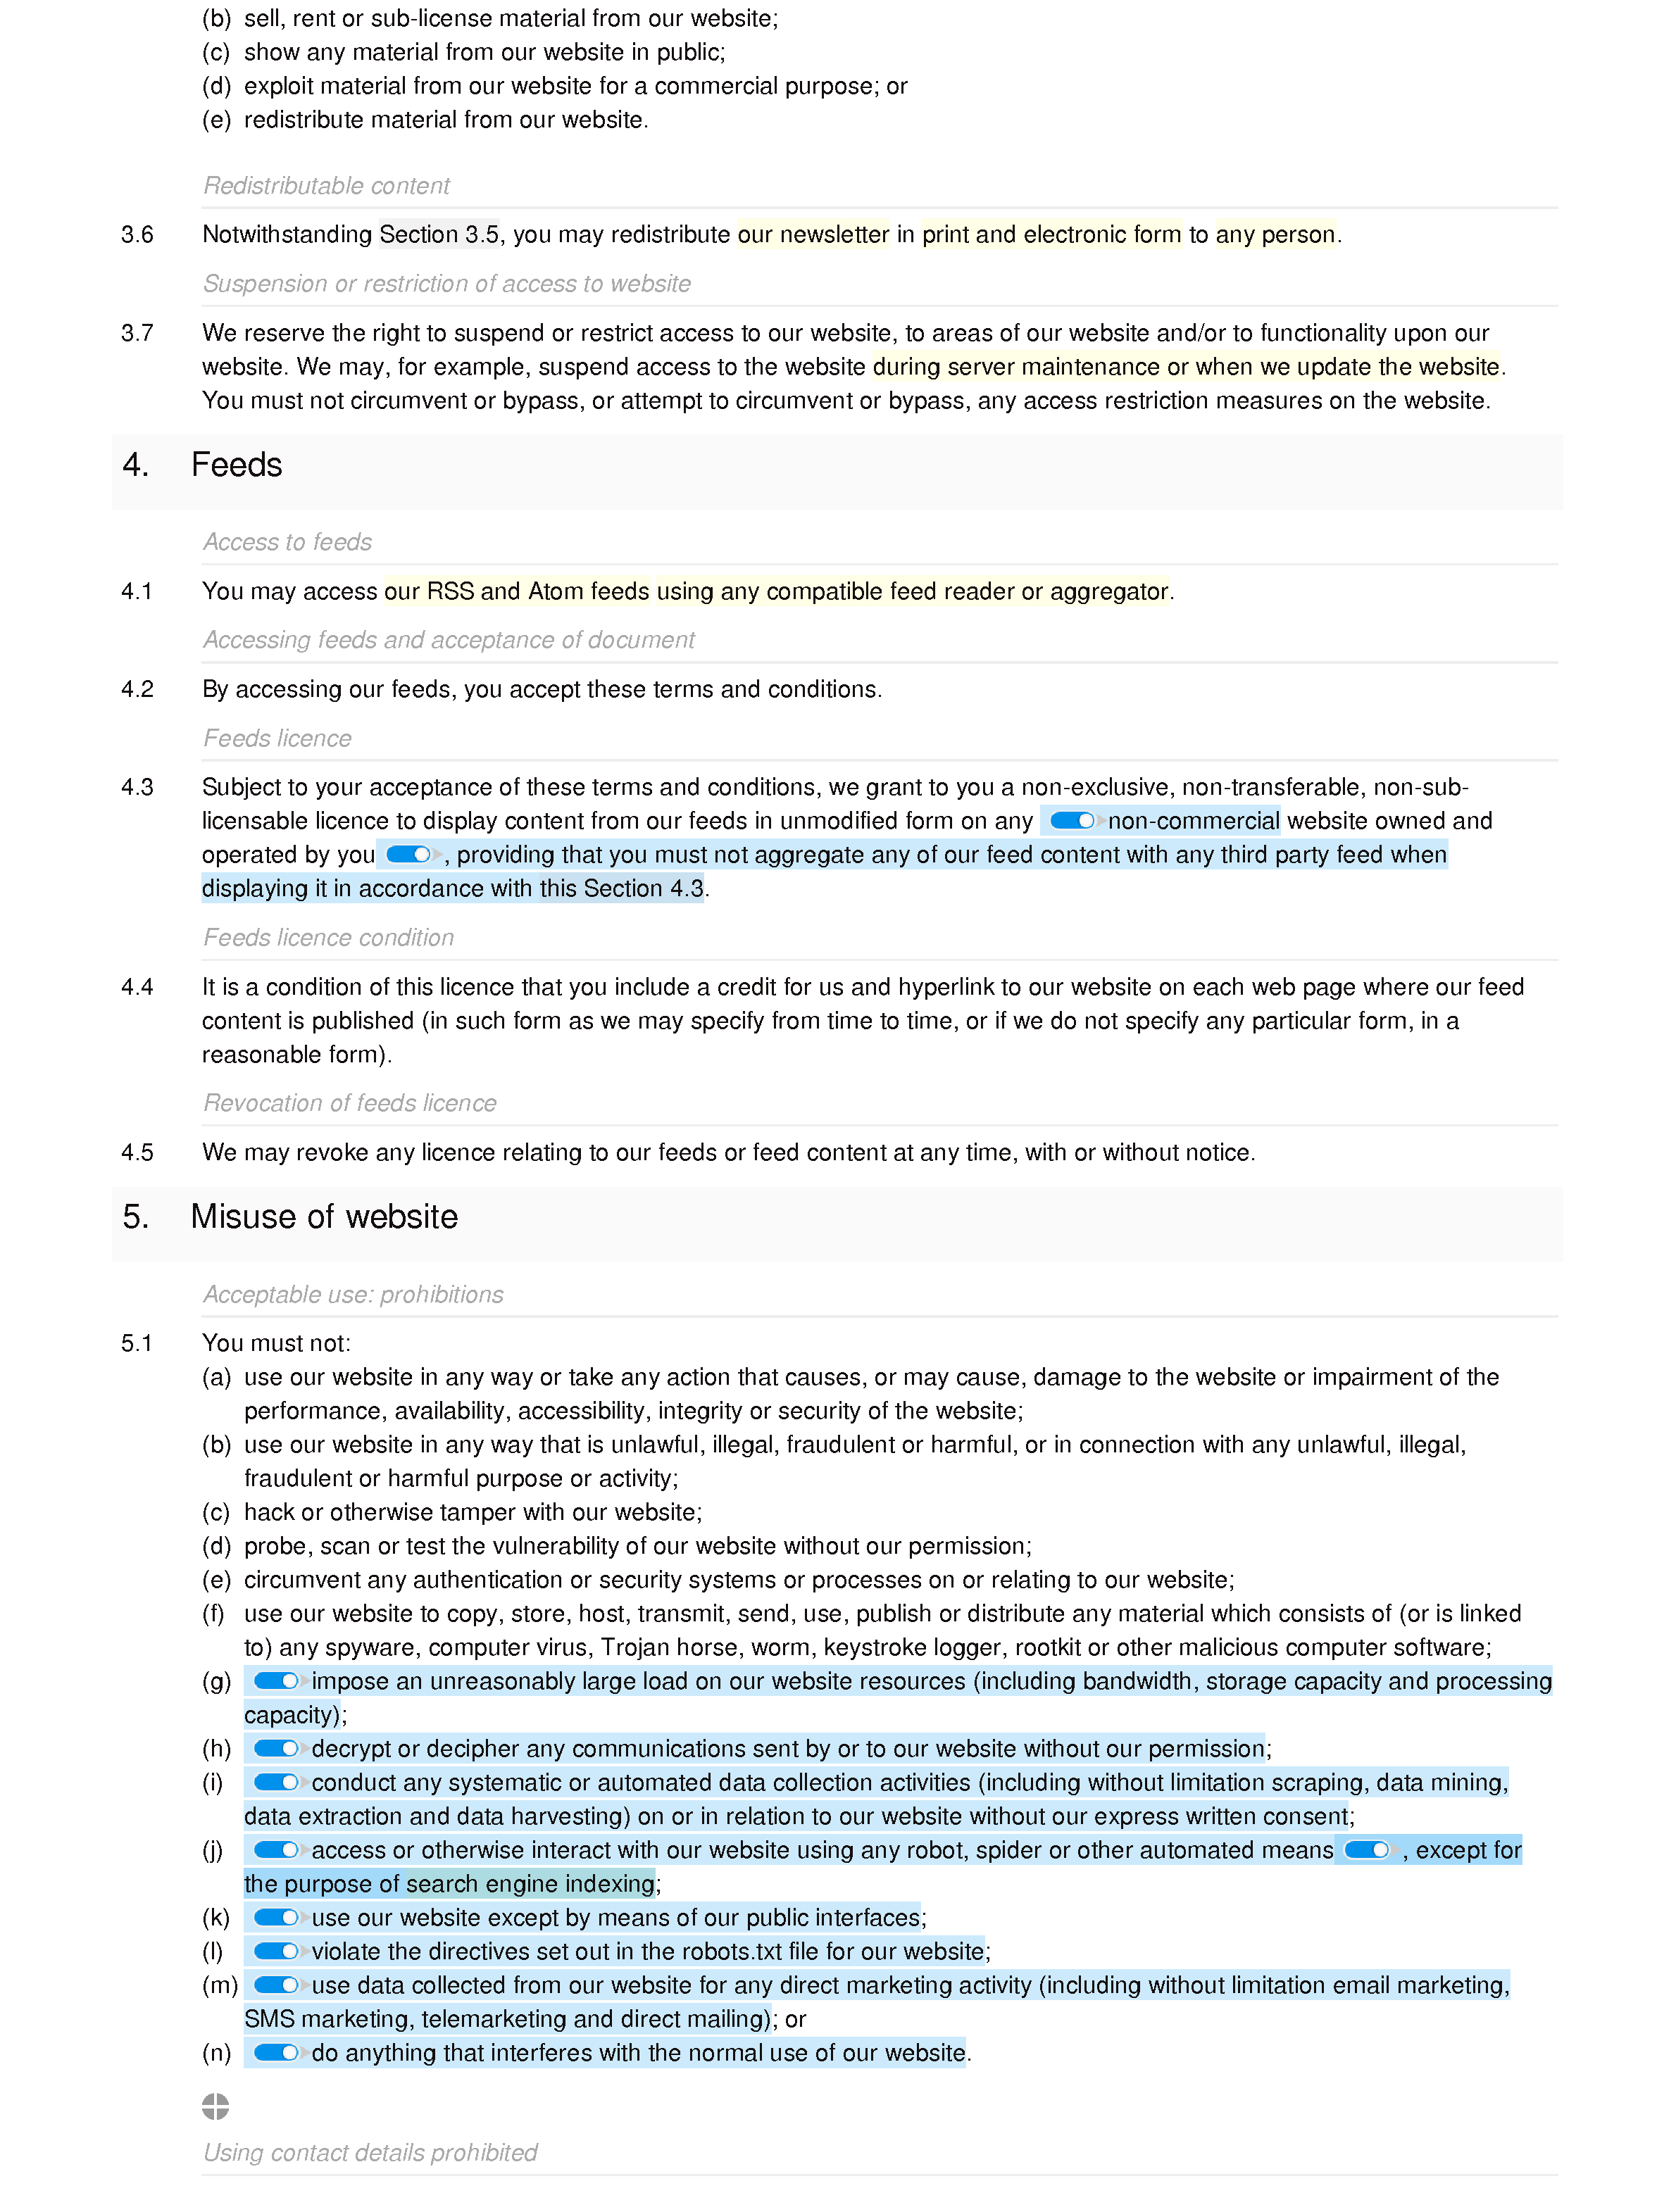 Social network and questions website terms and conditions document editor preview